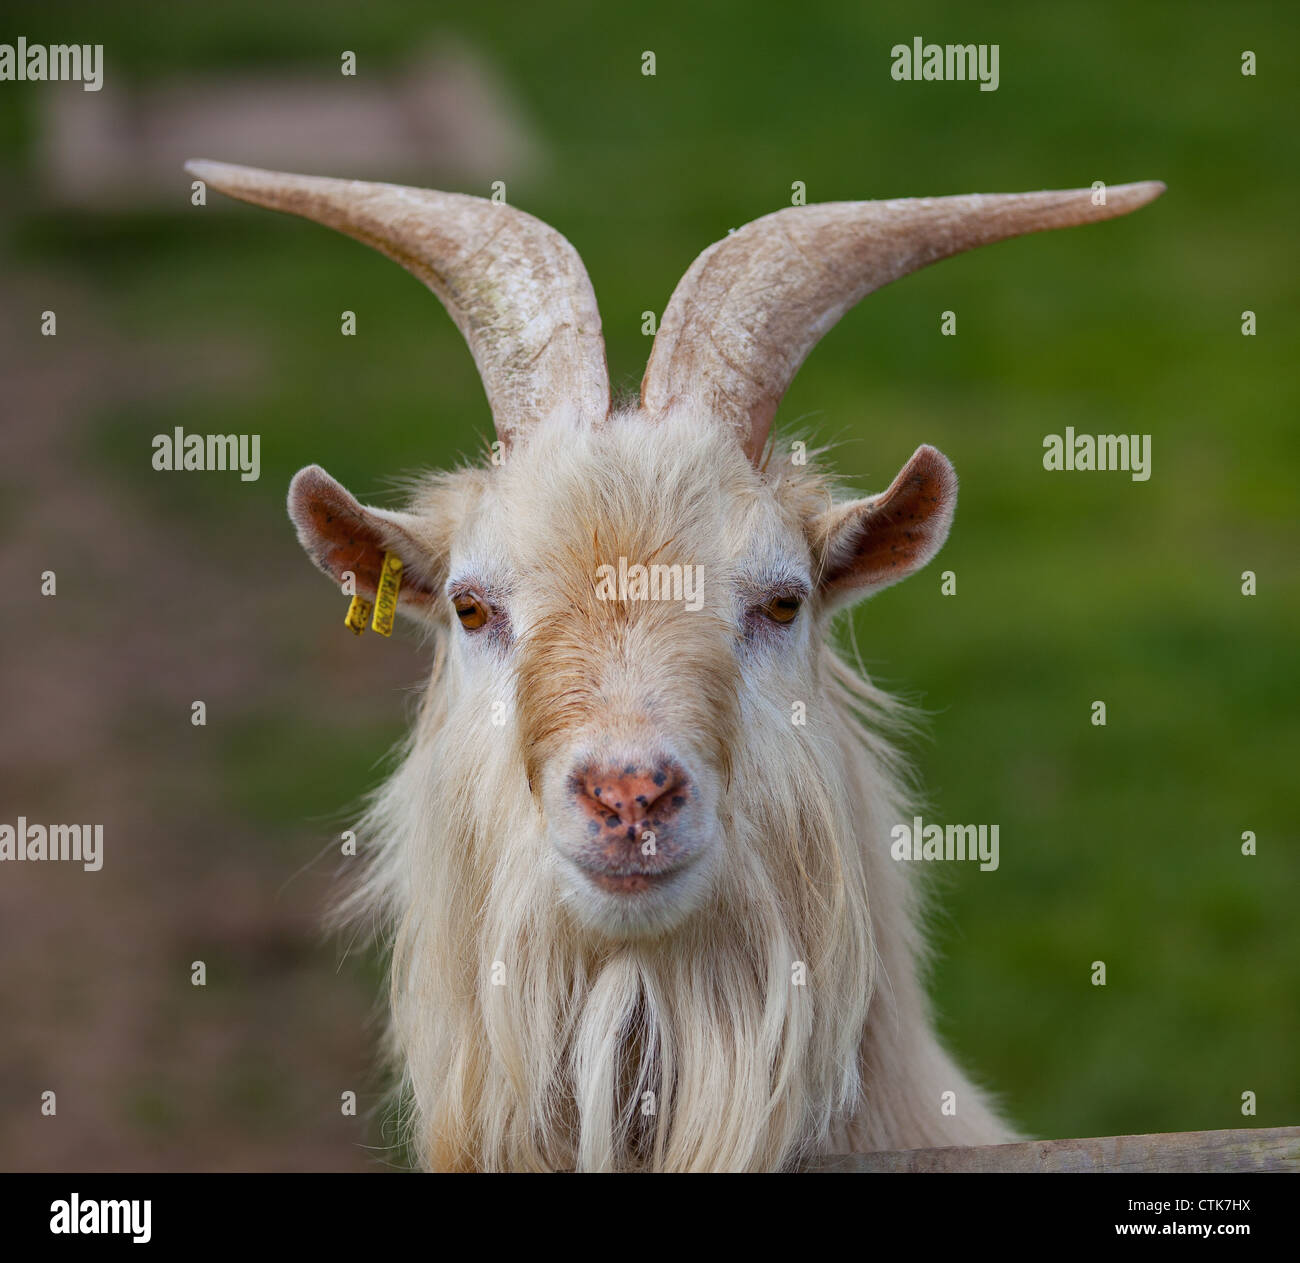 Goat looking head on in funny way Stock Photo